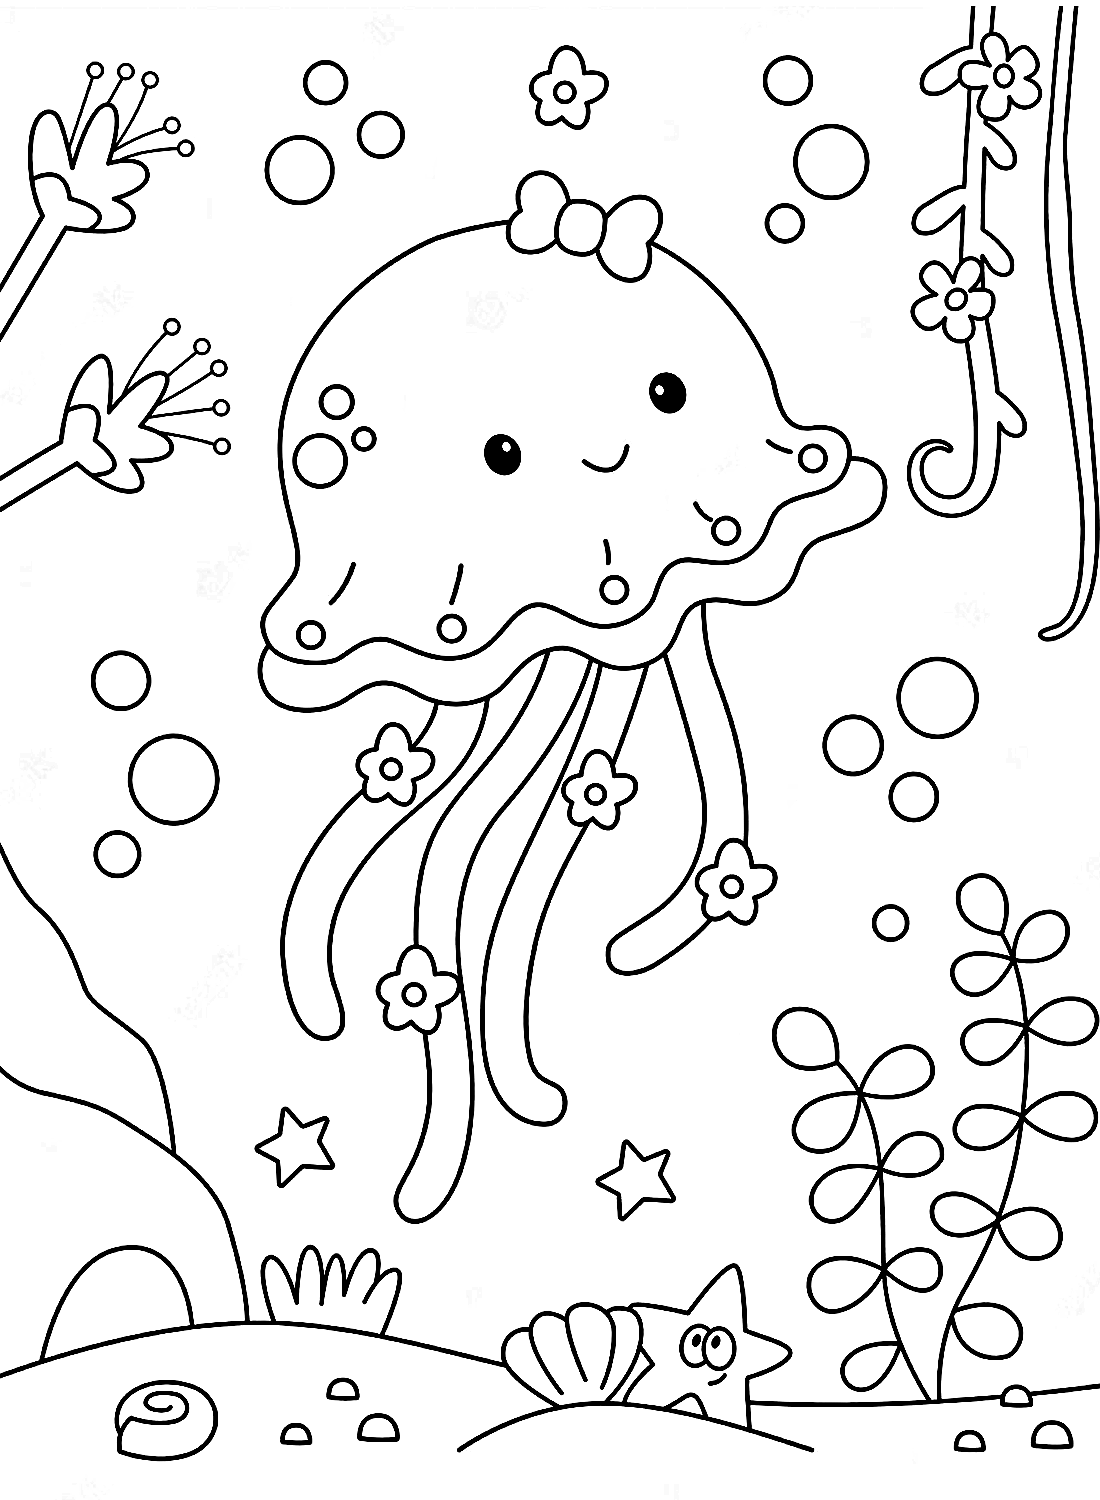 The Beautiful Jellyfish Coloring Page